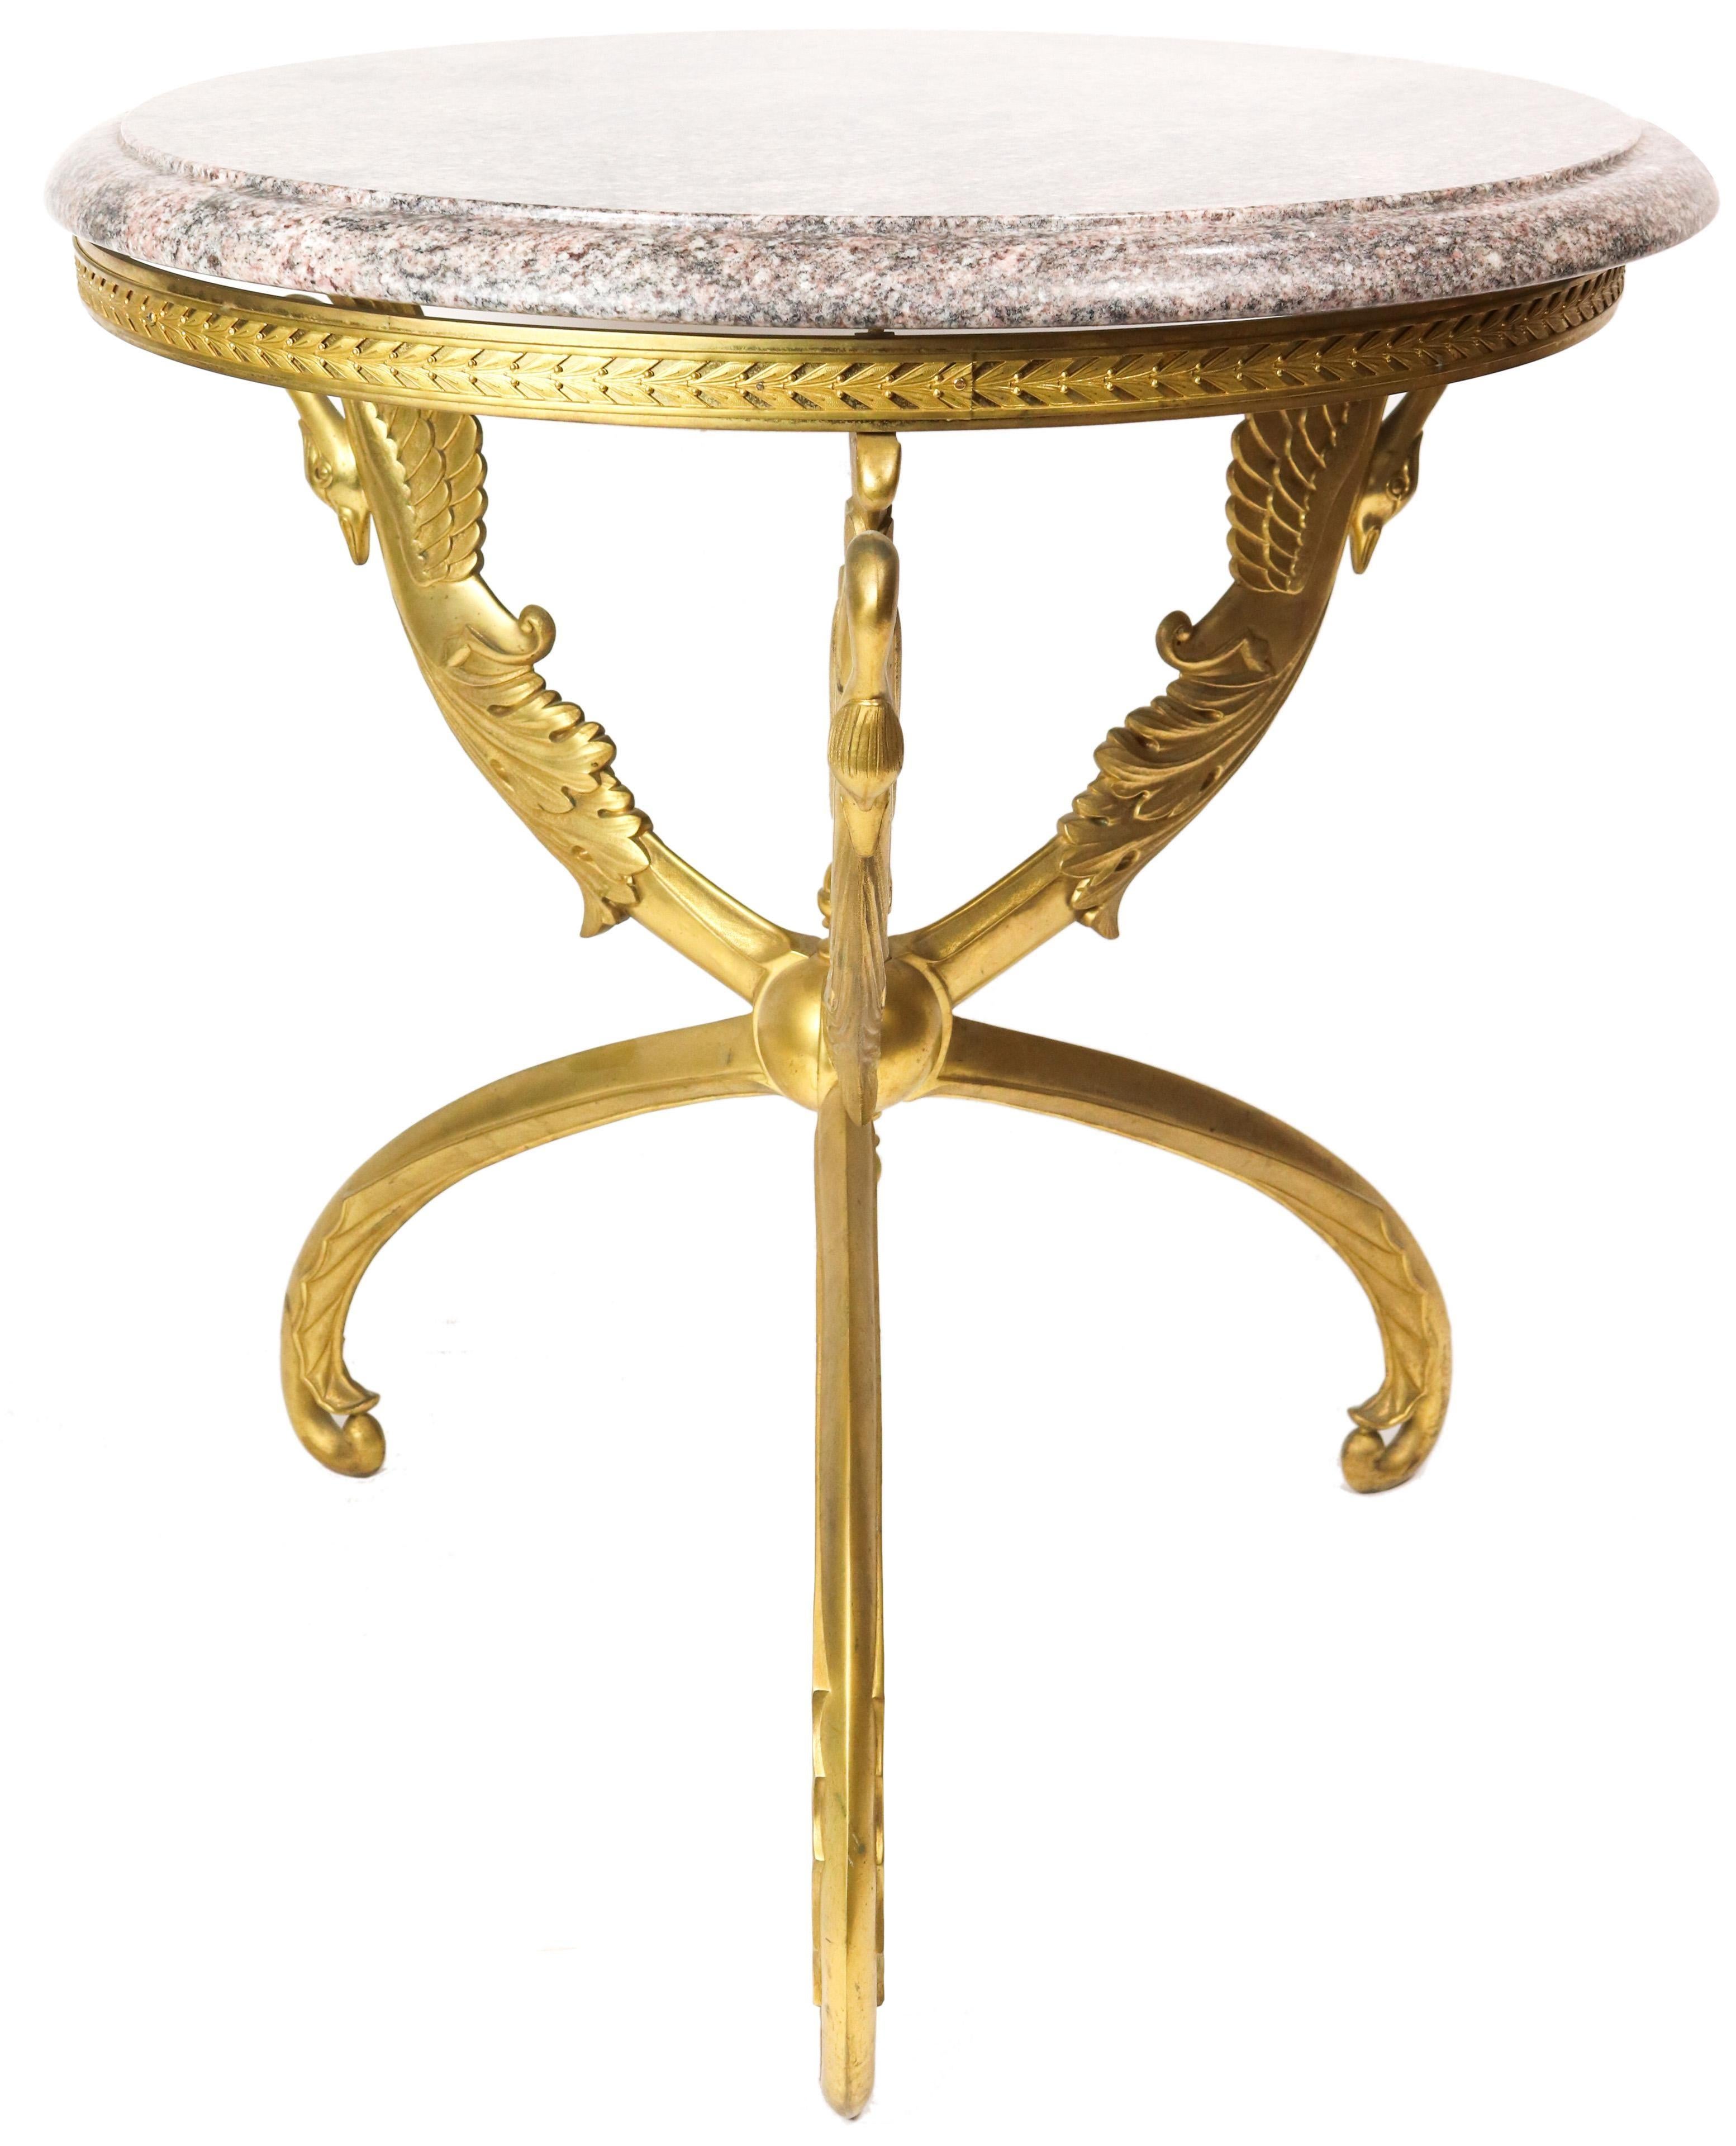 Very finely cast Empire style gilt bronze gueridon table with swan motif.